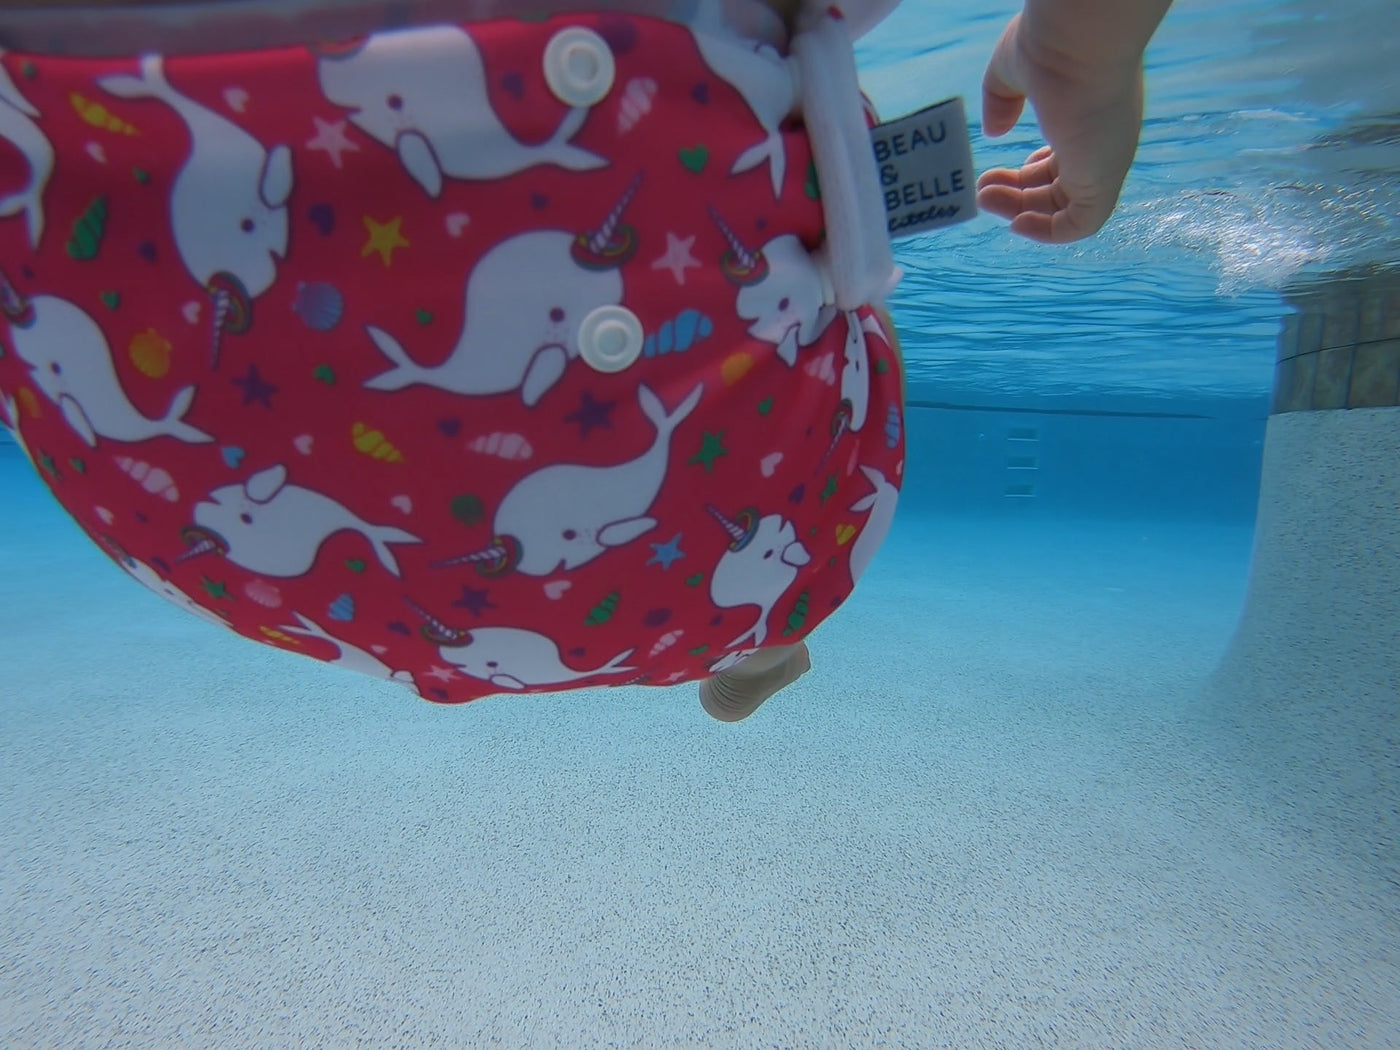 Narwhals 2-5 years Nageuret Swim Diaper (Hot Pink)